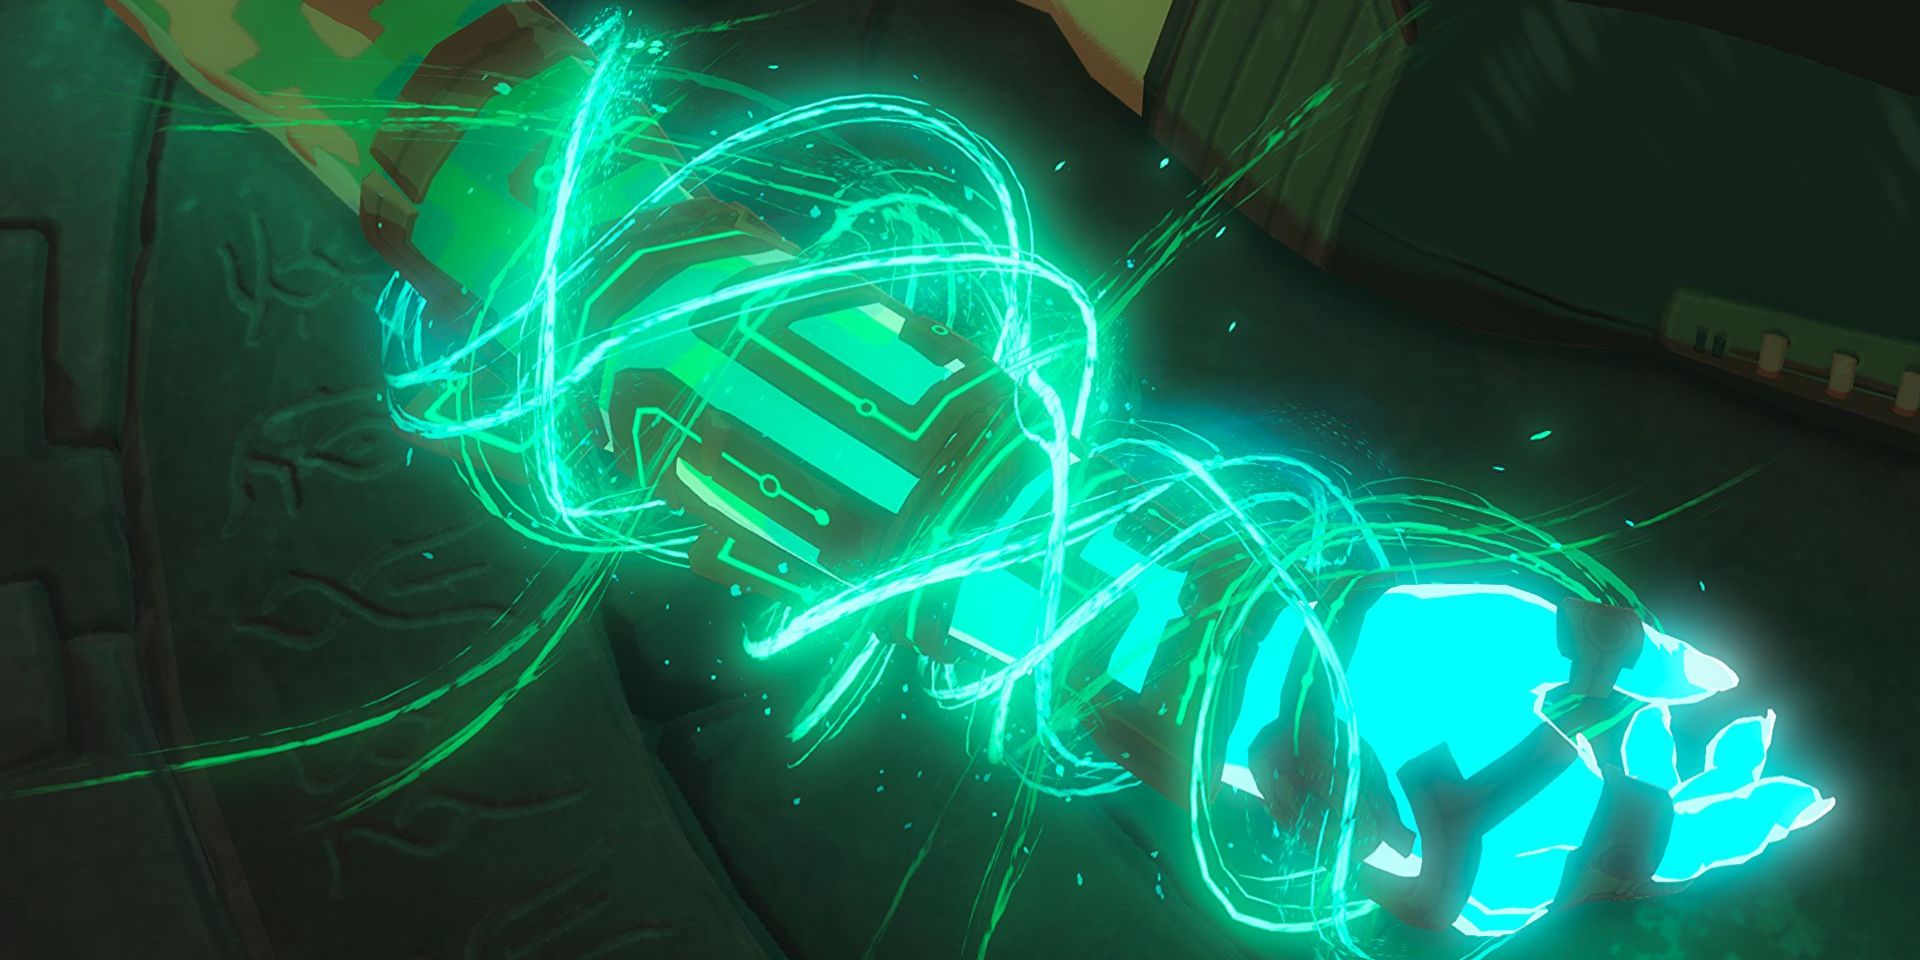 Link's mysterious new arm could be the impetus for players' power reset at the beginning of BOTW 2.